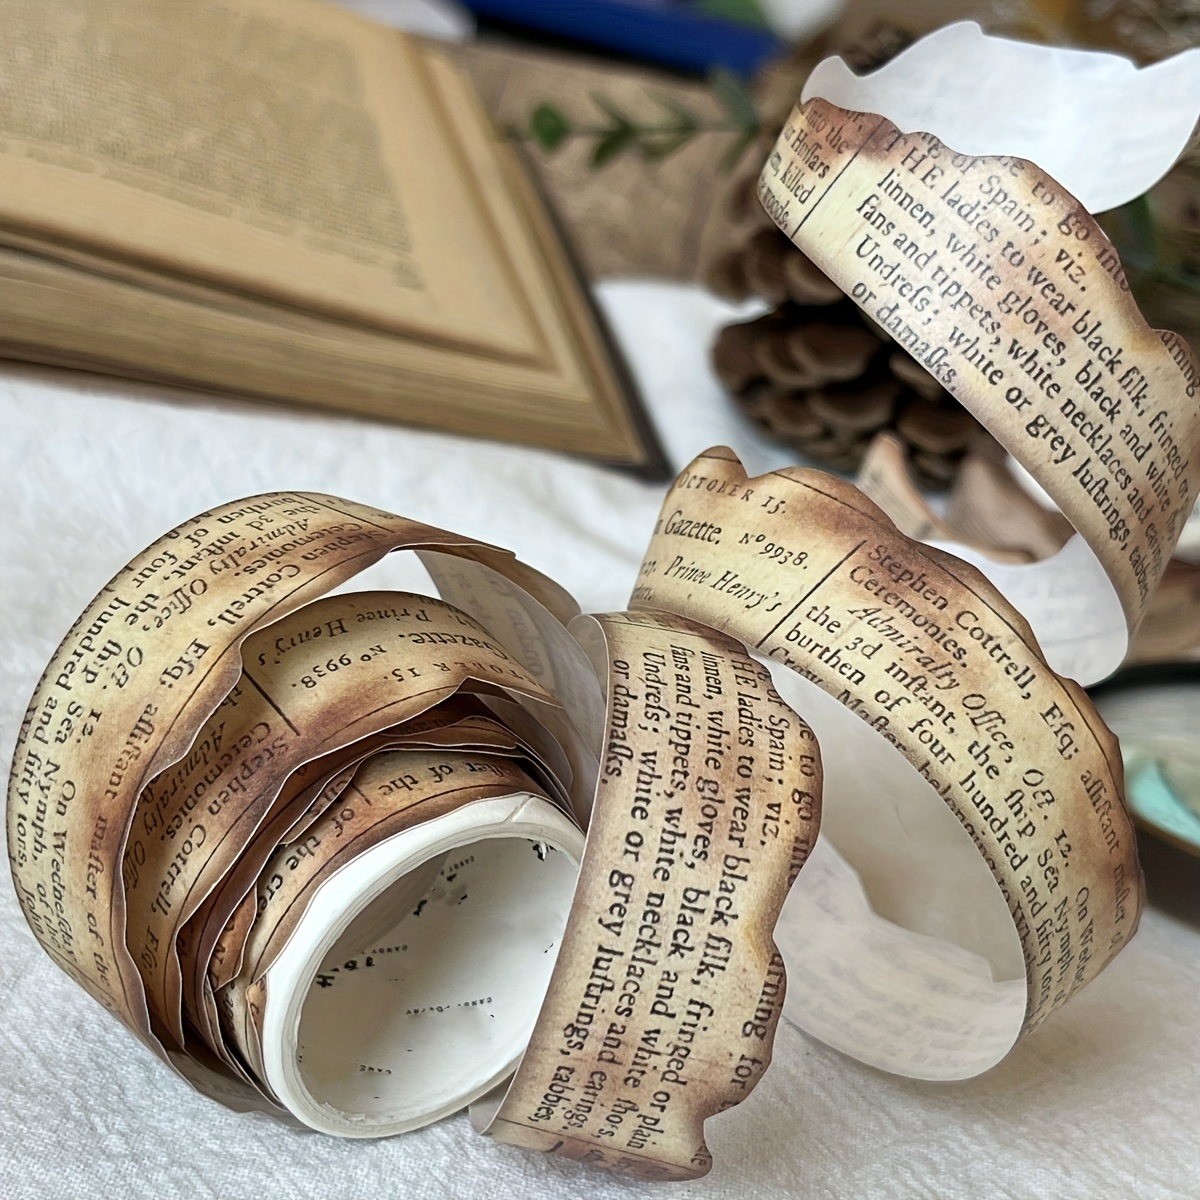 

Vintage Washi Tape Splinter Series Vintage Caramel Clipping Special-shaped Burned Irregular Edge Diy Hand Account Circulation Stickers Hand Account Collage Tape